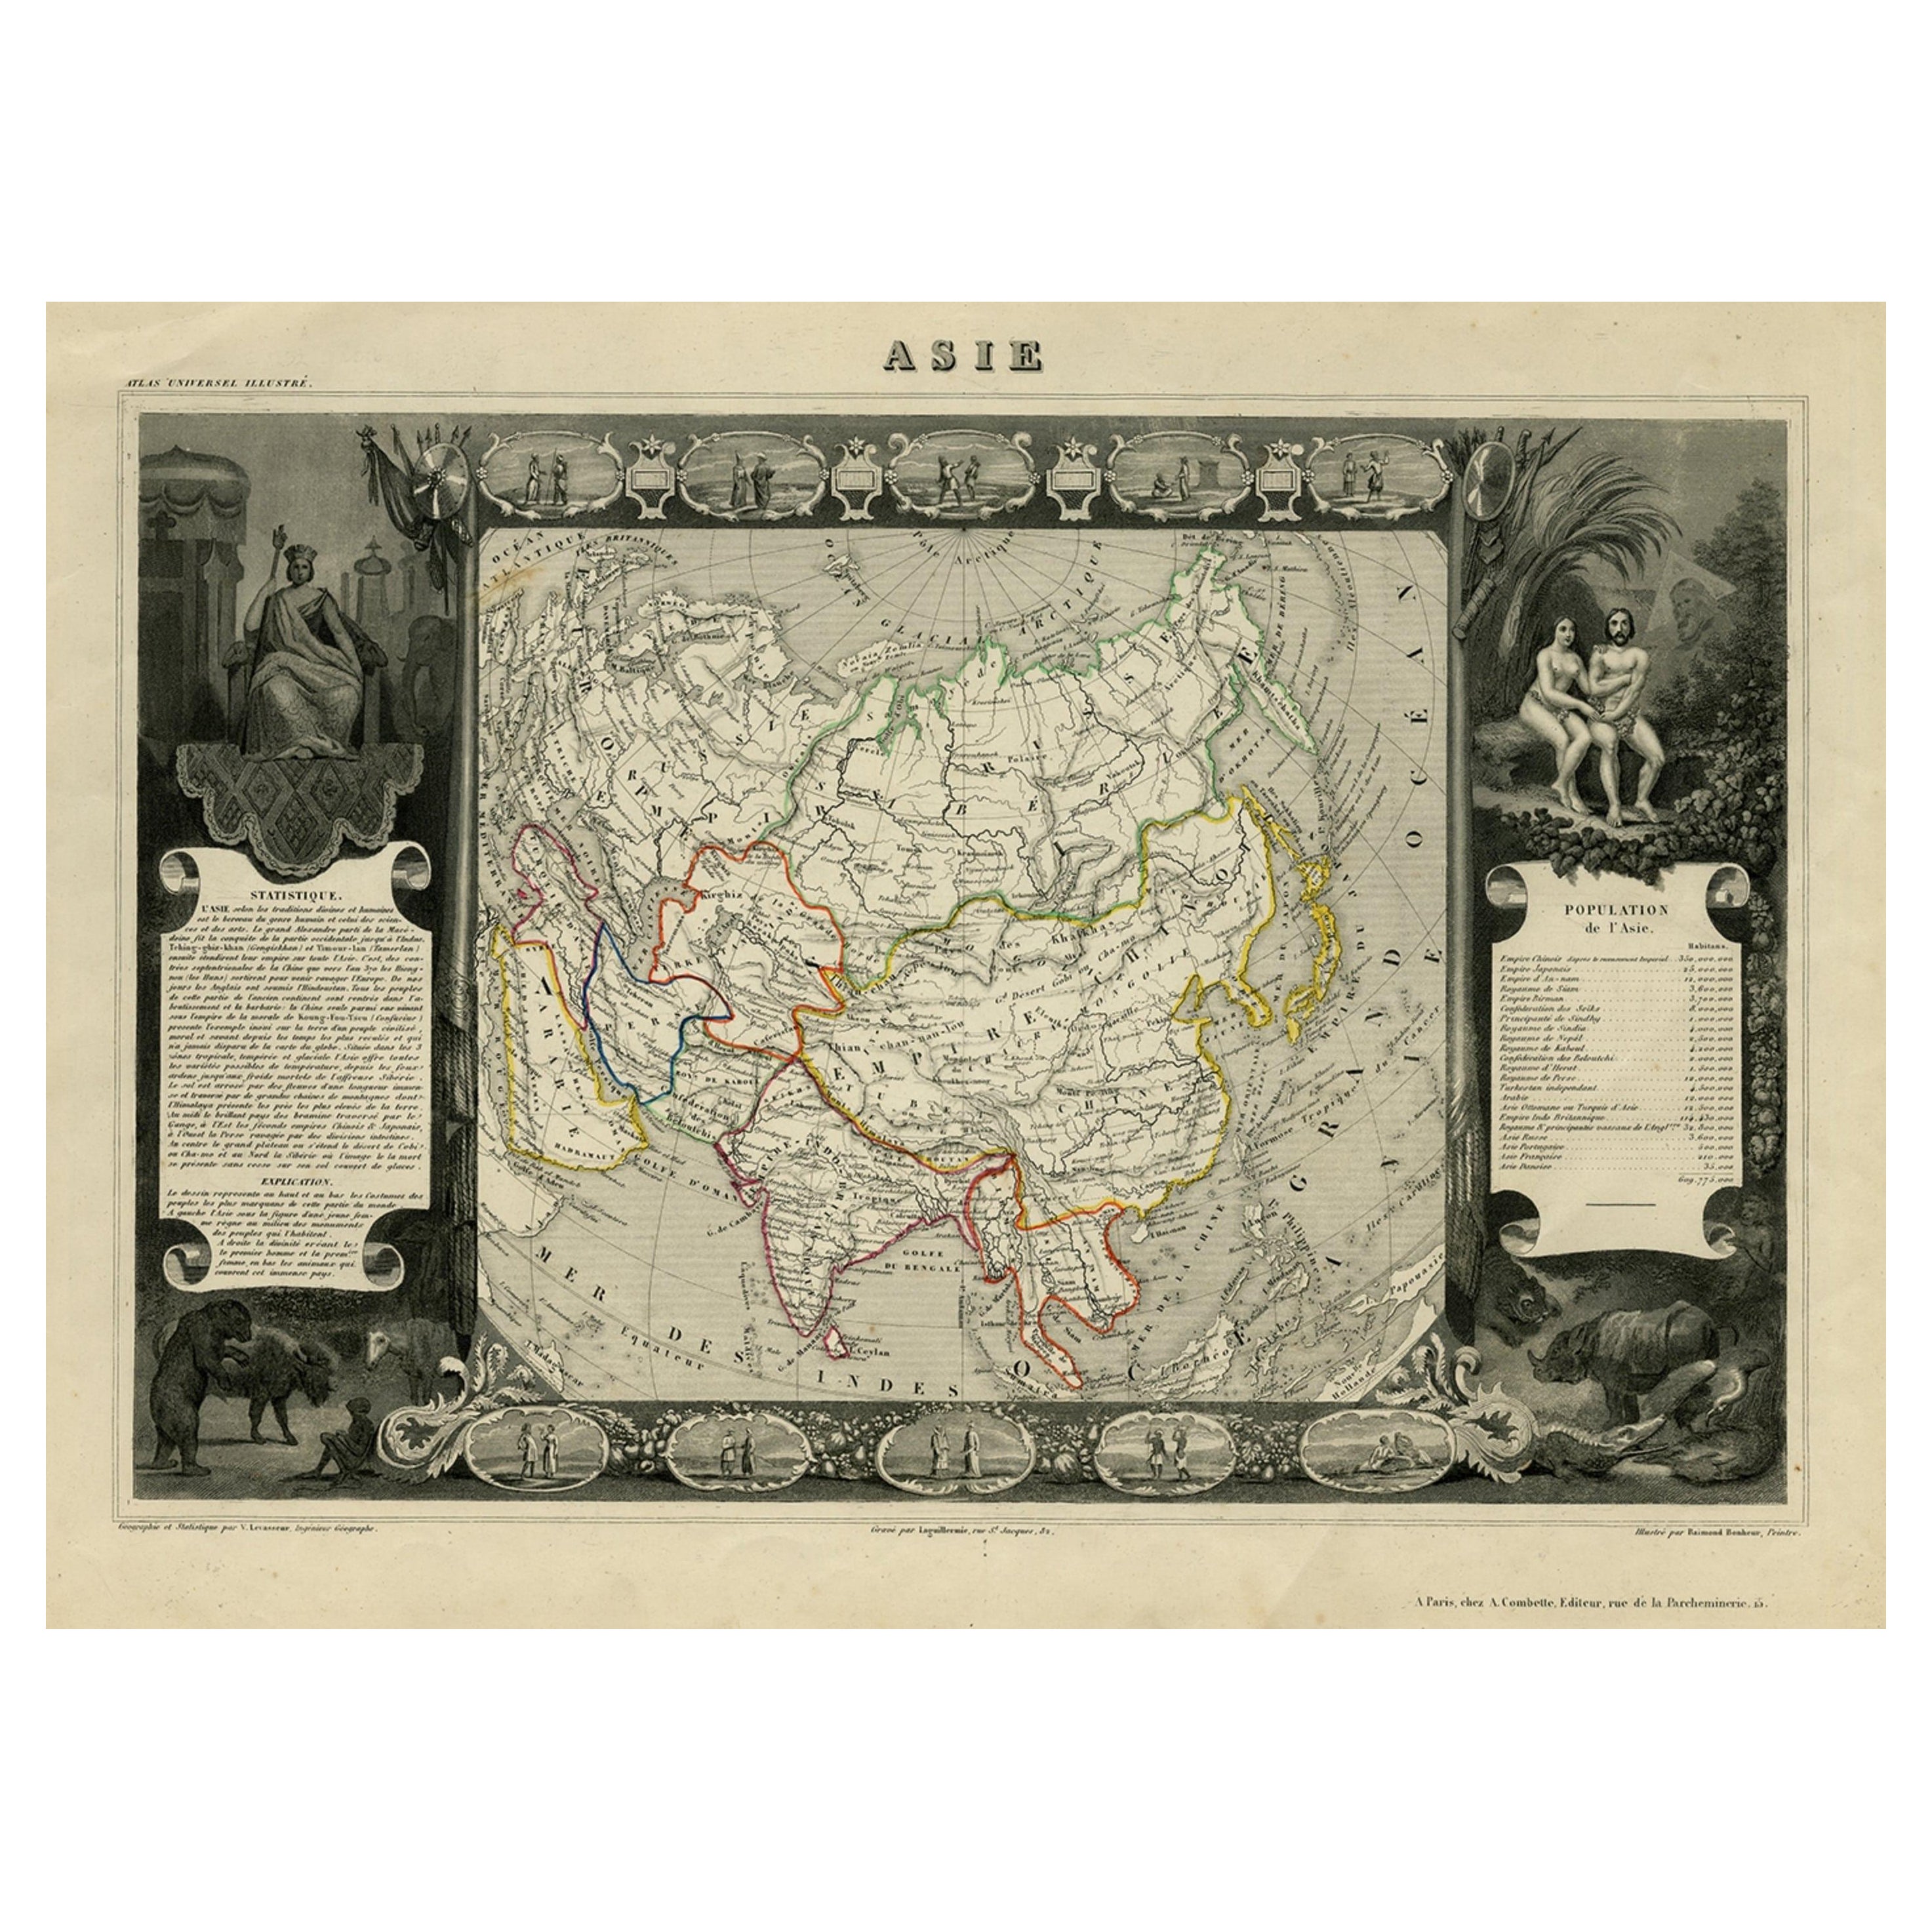 Nicely Decorated Antique Map of Asia, incl Population Figures, 1854